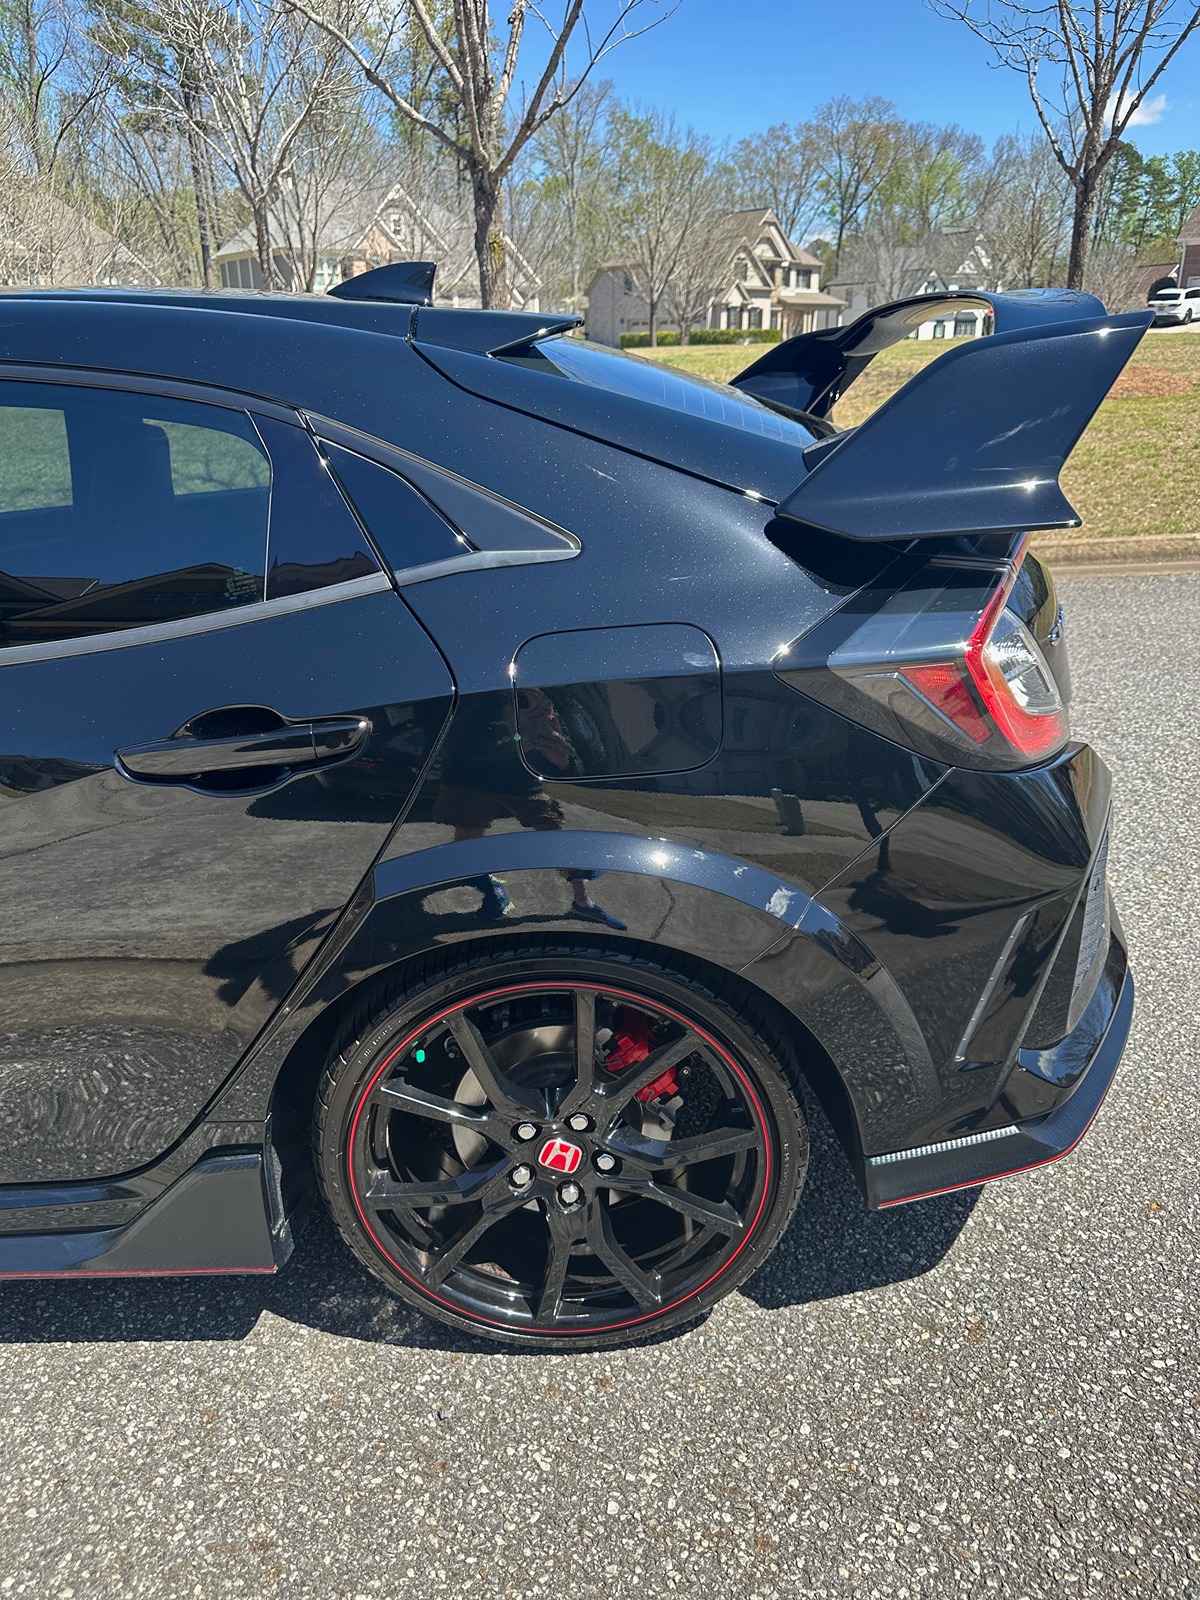 Honda Civic 10th gen Sold. 2019 Civic Type R for sale IMG_8144